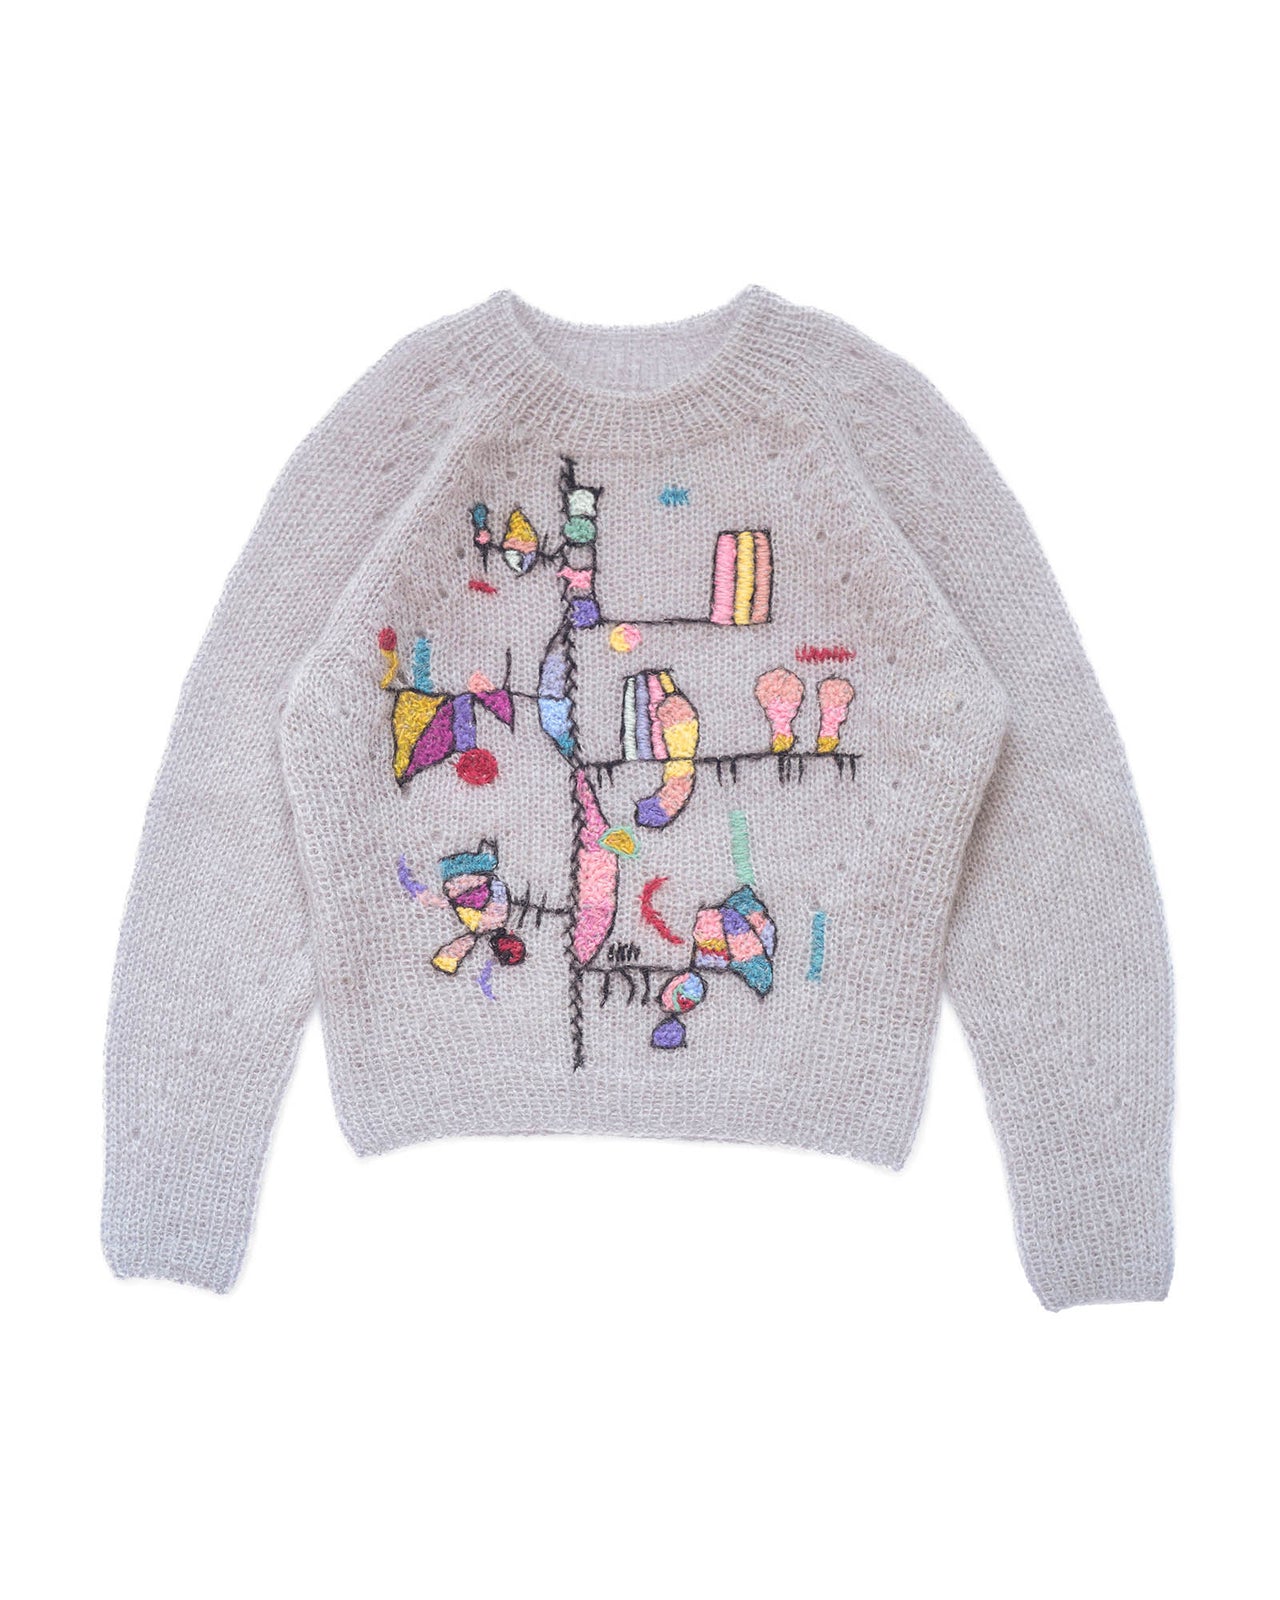 Grey mohair sweater laid flat on white background. The sweater is adorned with colourful abstract embroidered shapes and patterns on the front. 